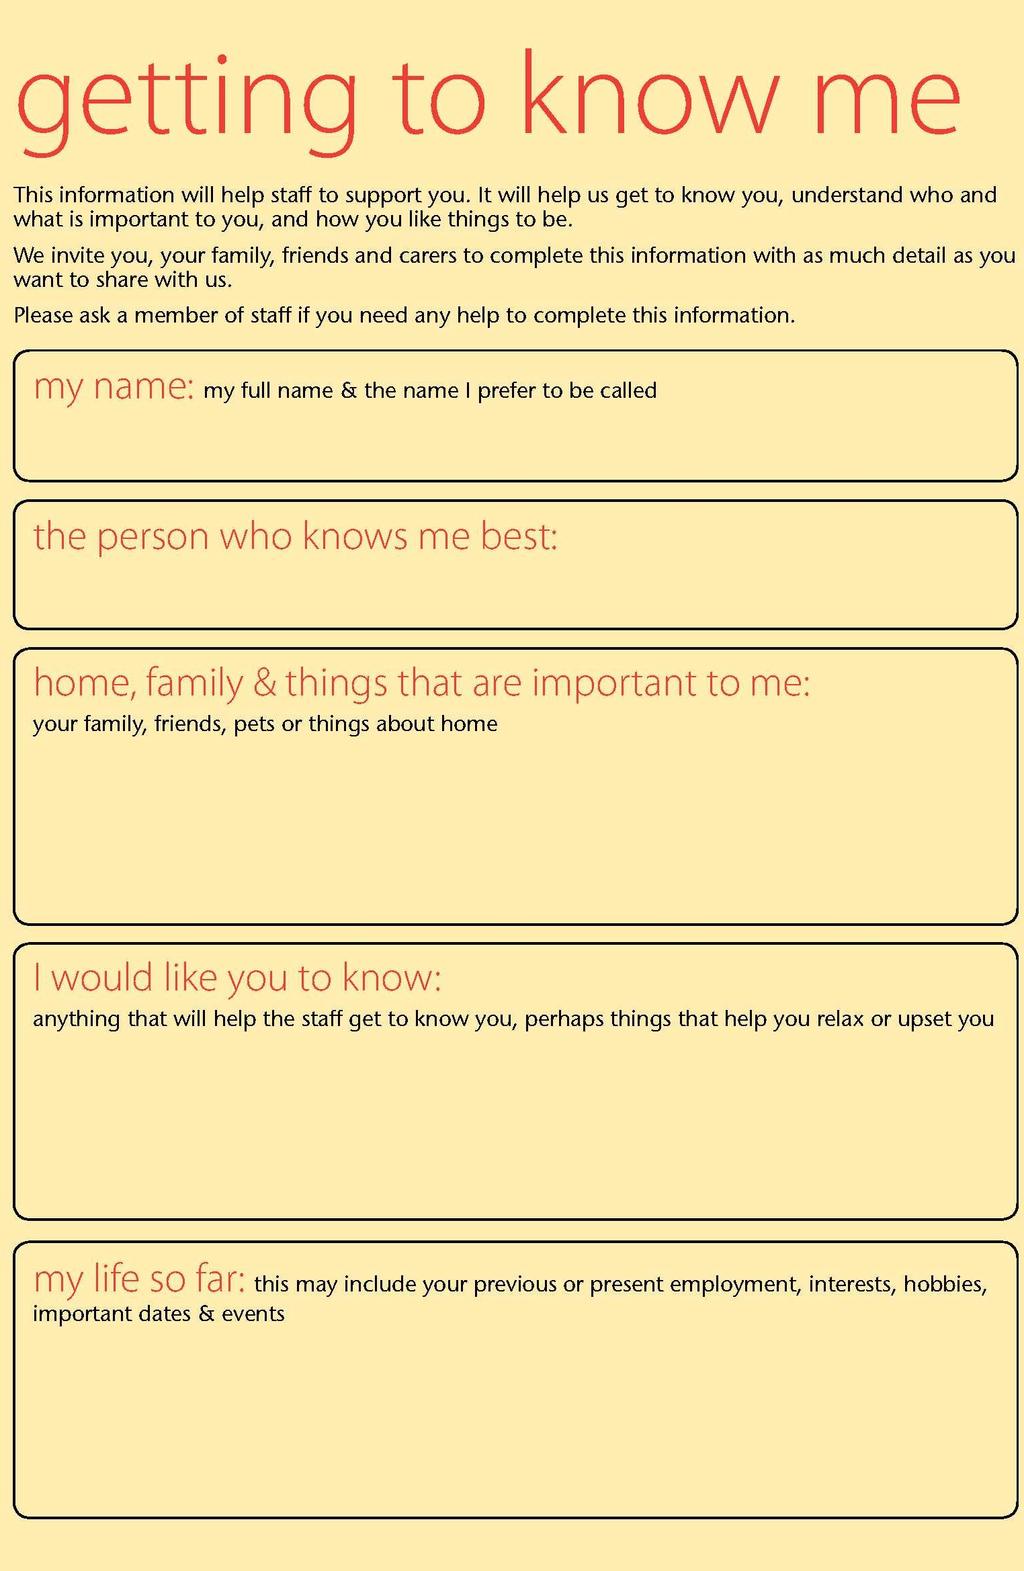 Getting to Know Me form New document aimed at enhancing care and support Alzheimer Scotland nurse and AHP consultants have created a document called the Getting to Know Me form which aims to provide